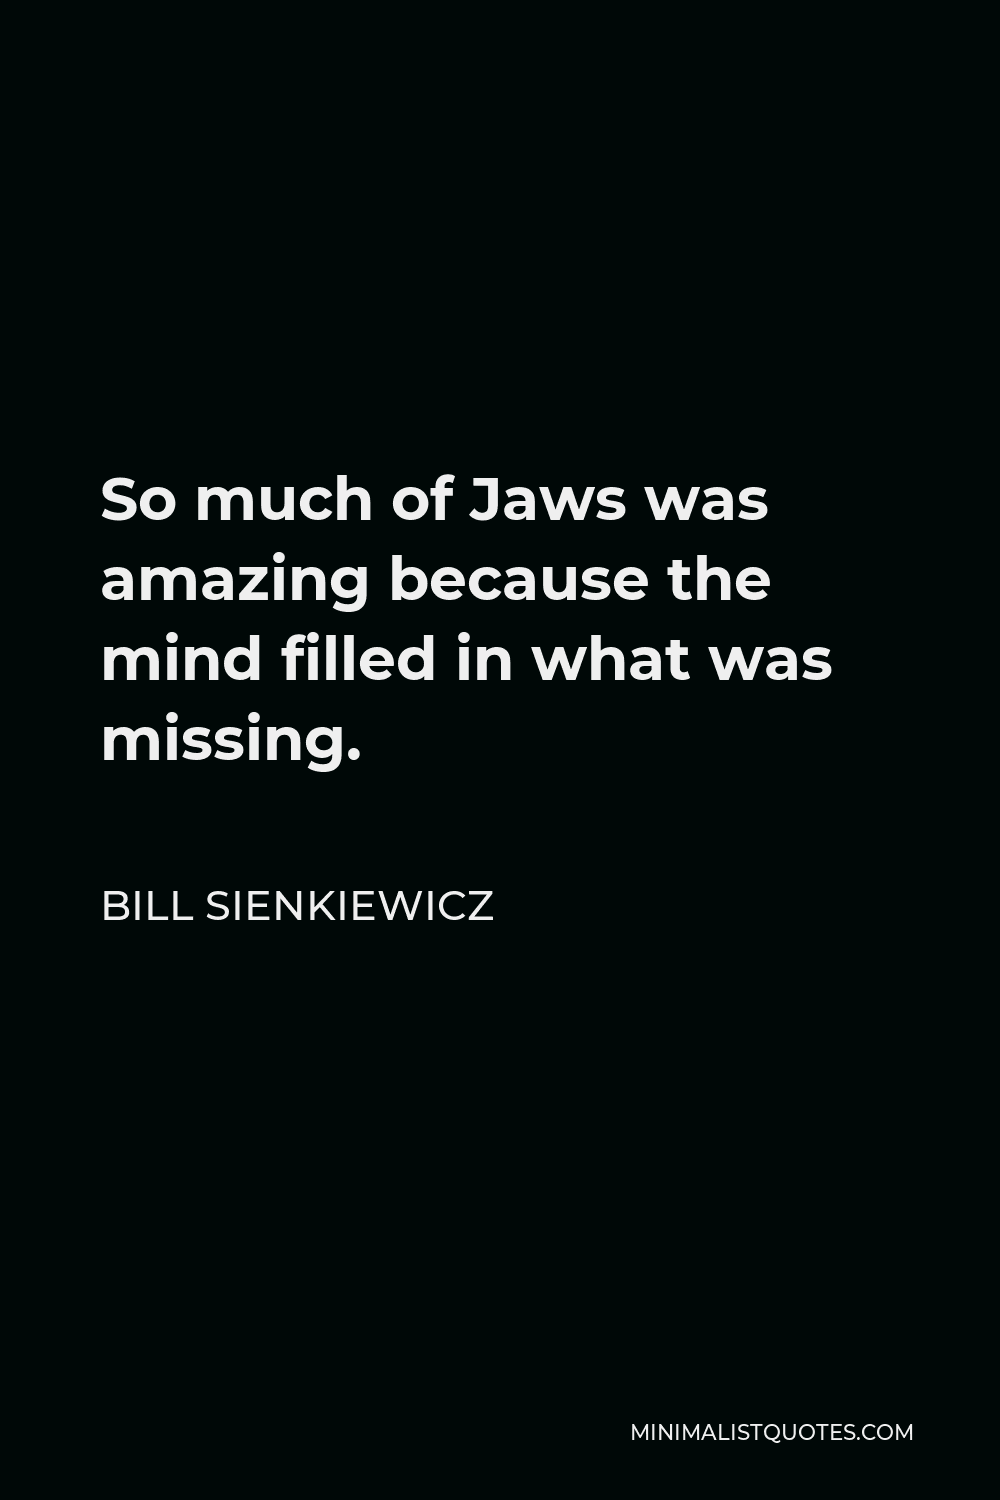 Bill Sienkiewicz Quote - So much of Jaws was amazing because the mind filled in what was missing.